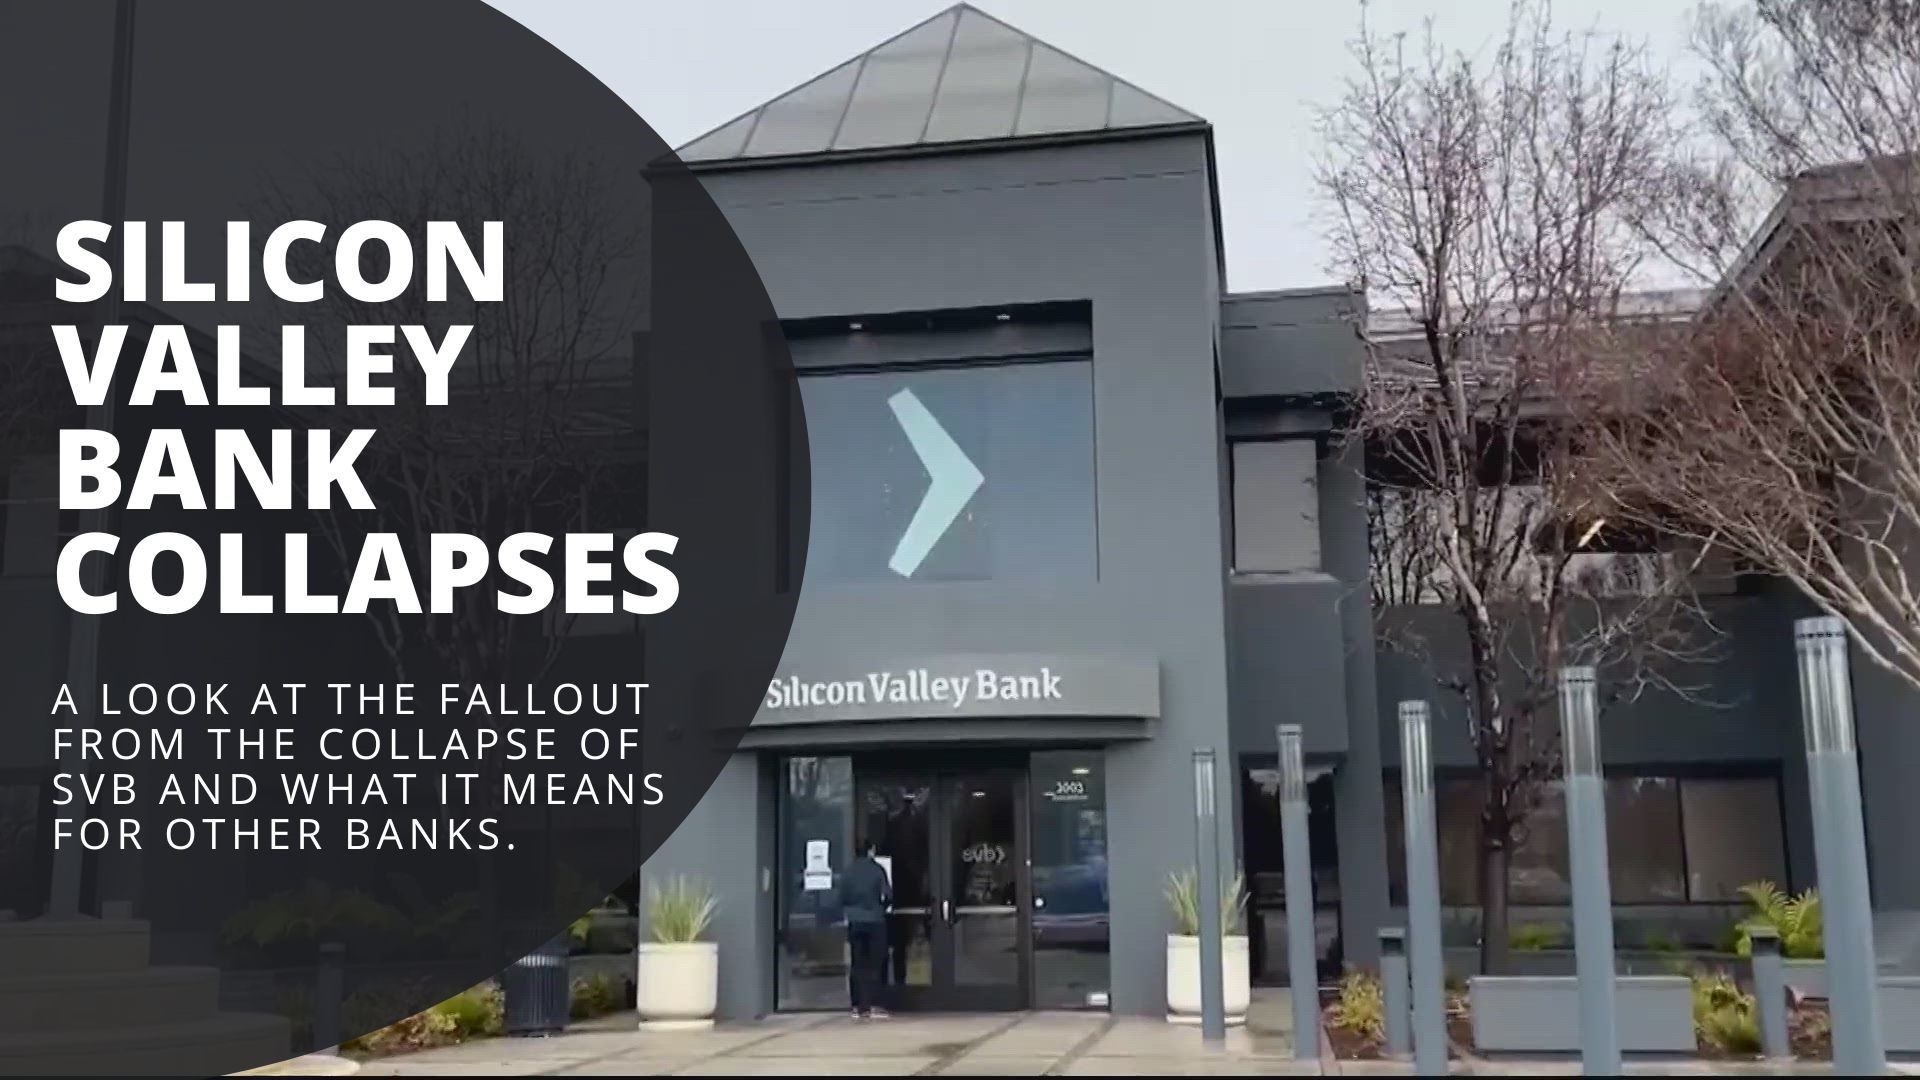 A look at the collapse of Silicon Valley Bank and the impact on businesses and the economy. Plus what experts think could happen next.